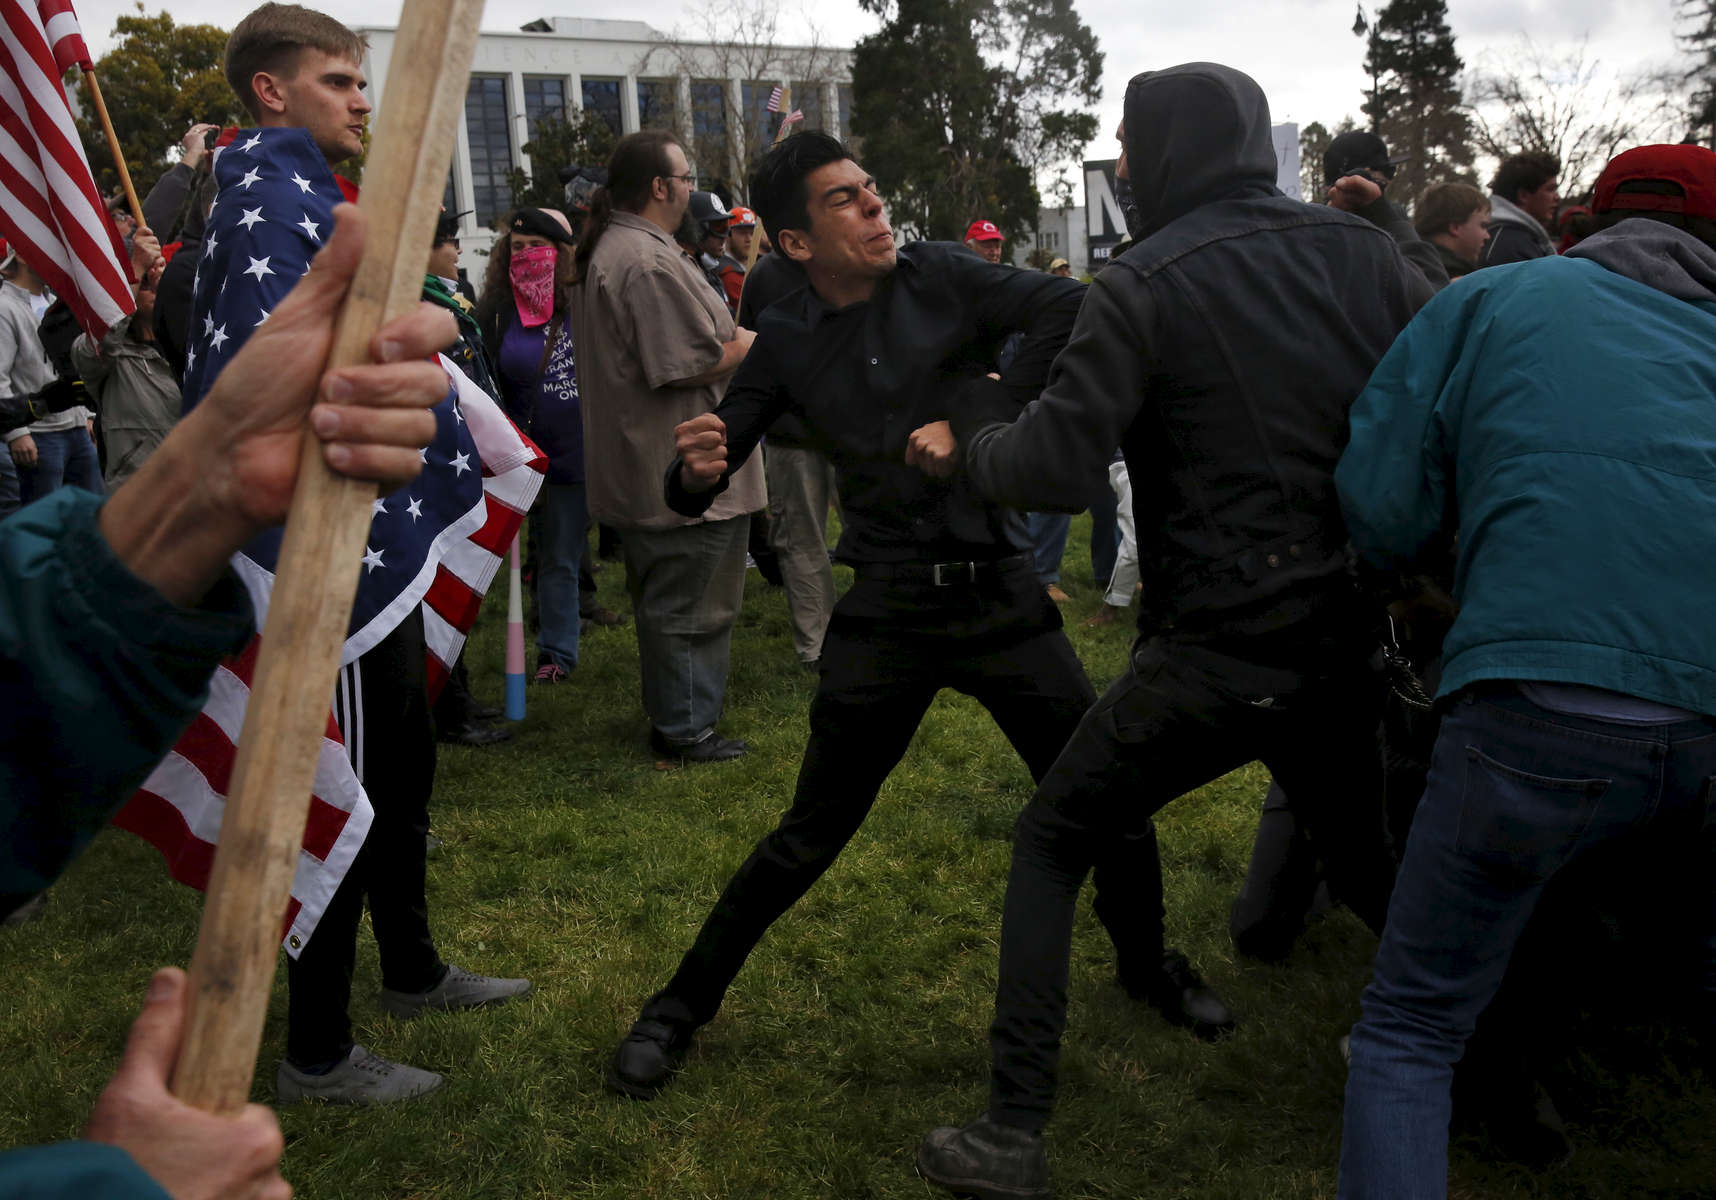 A Trump supporter who preferred not to give his name trades blows with a masked anti-fascist protester during a pro-President Donald Trump rally and march at the Martin Luther King Jr. Civic Center park March 4, 2017 in Berkeley, Calif. 